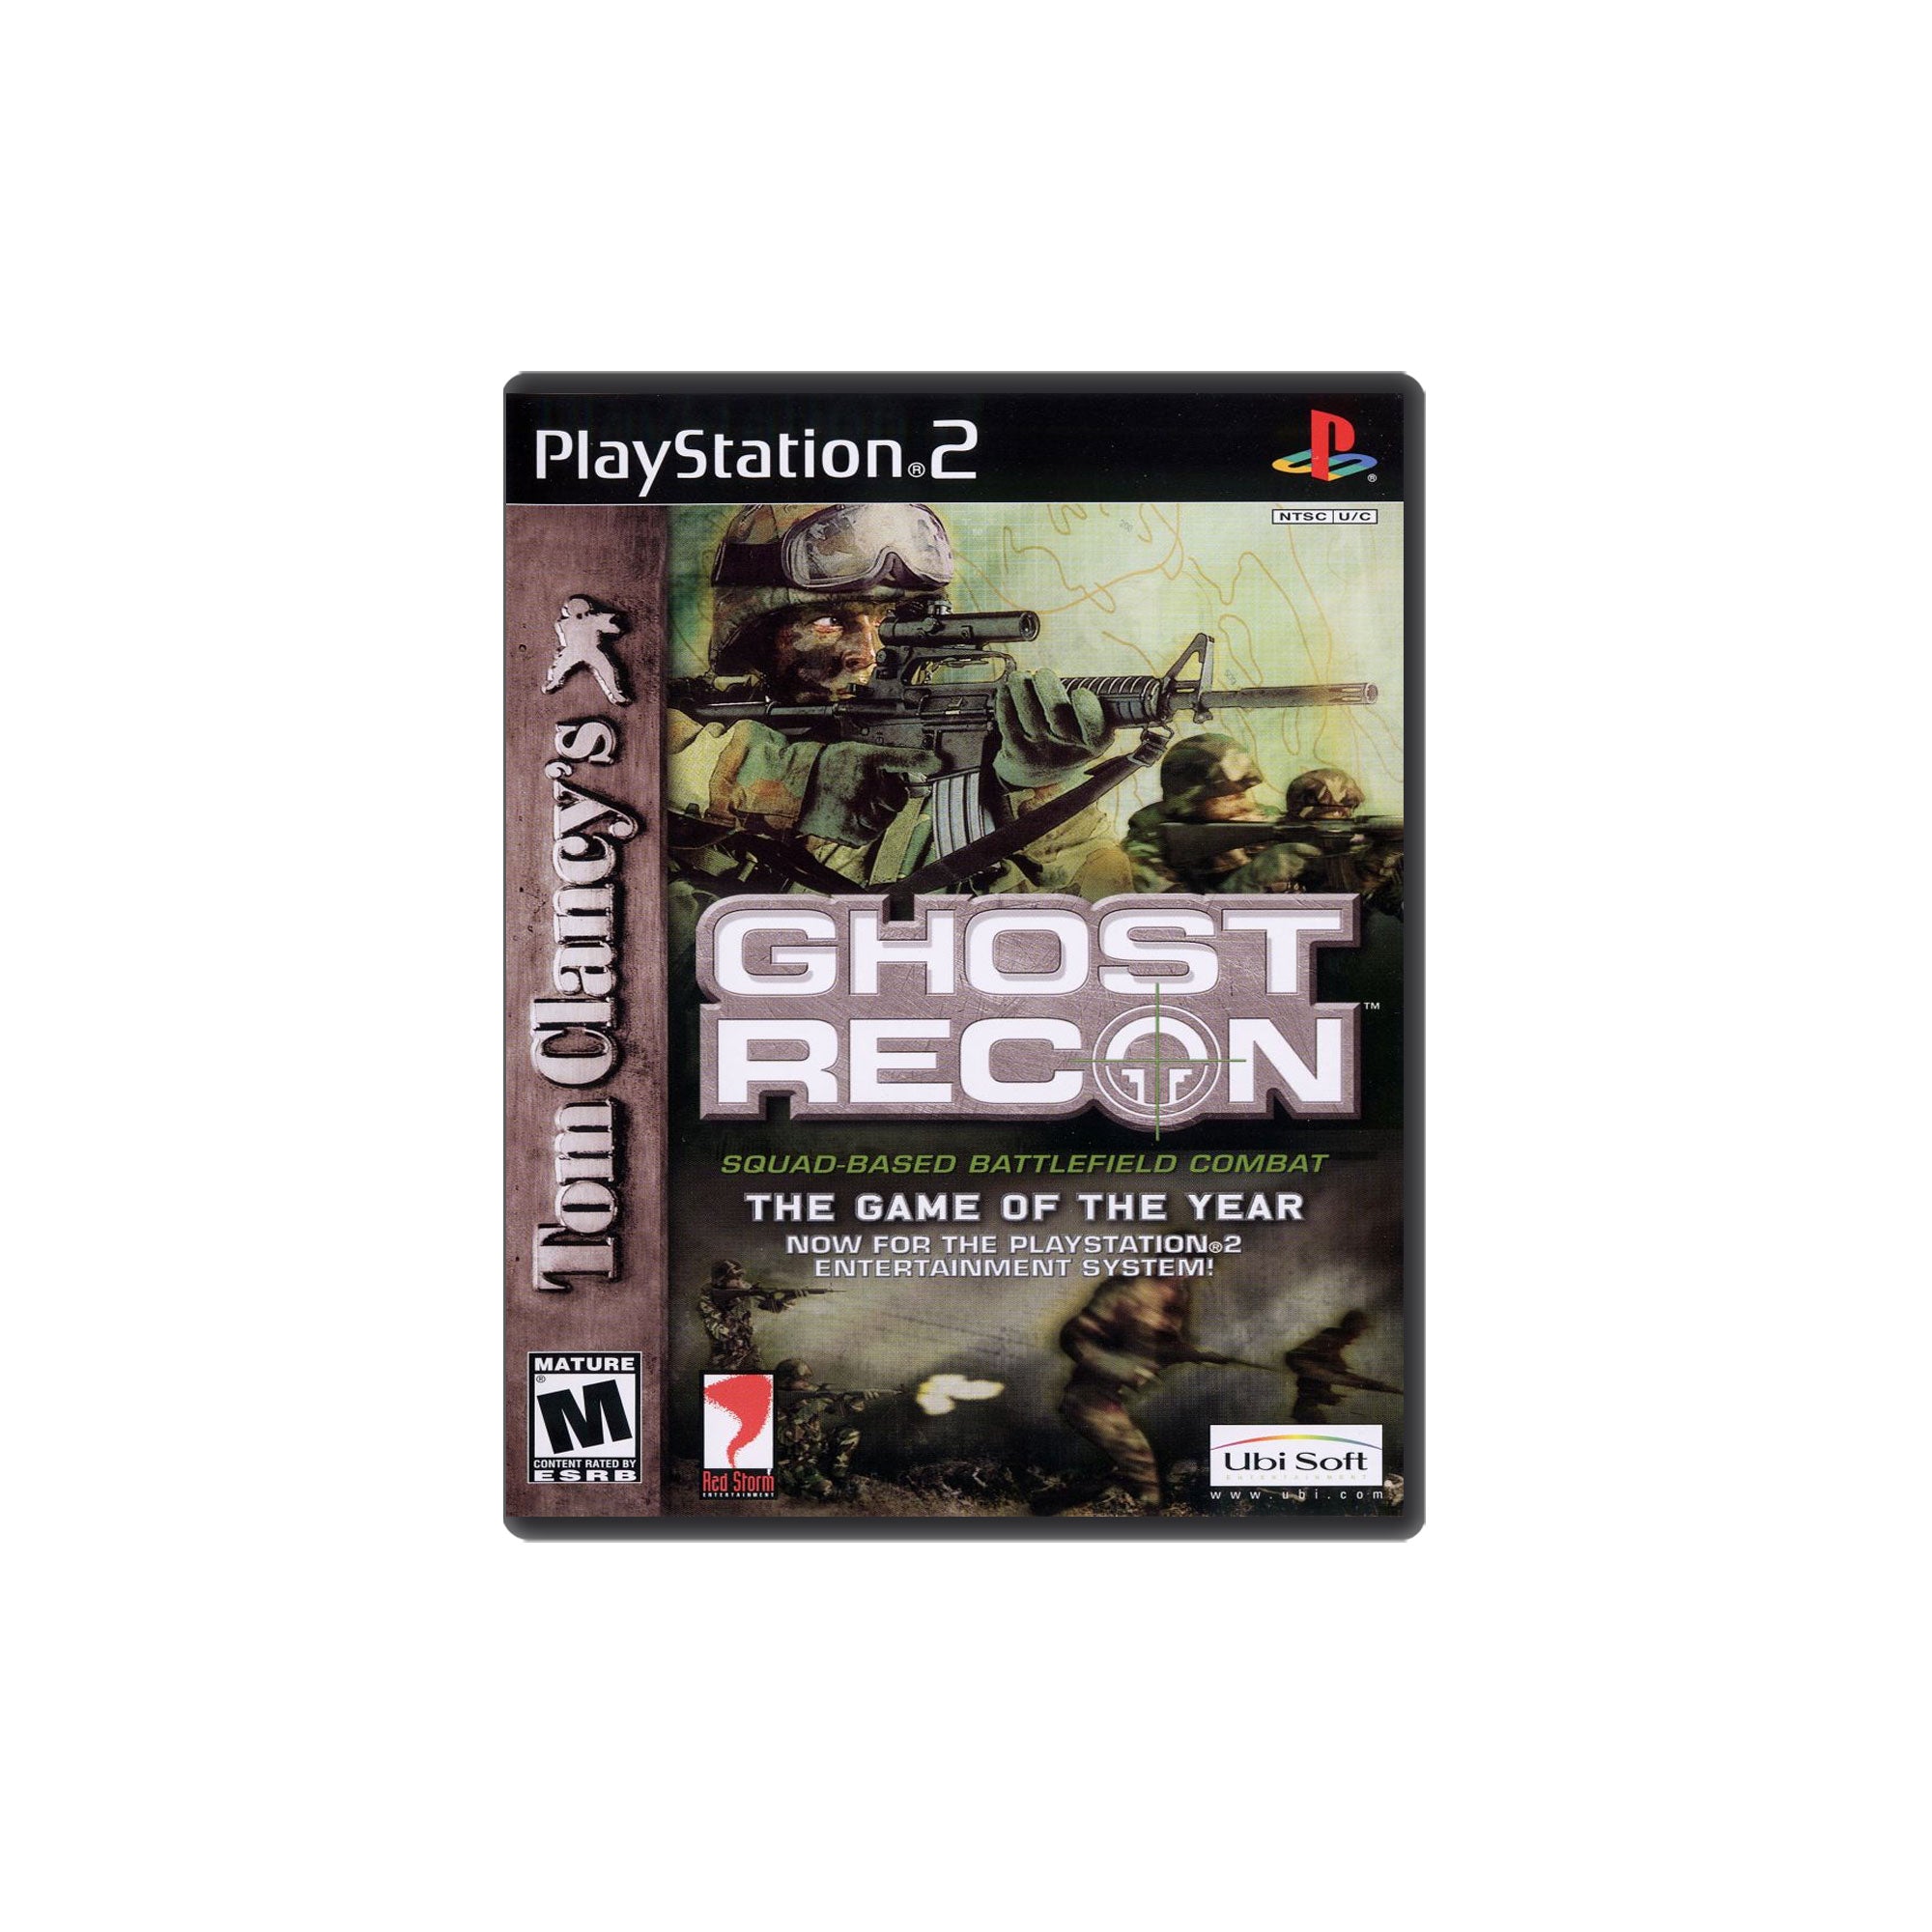 Swifty Games - Tom Clancy’s Ghost Recon - Greatest Hits (Playstation 2, 2001)